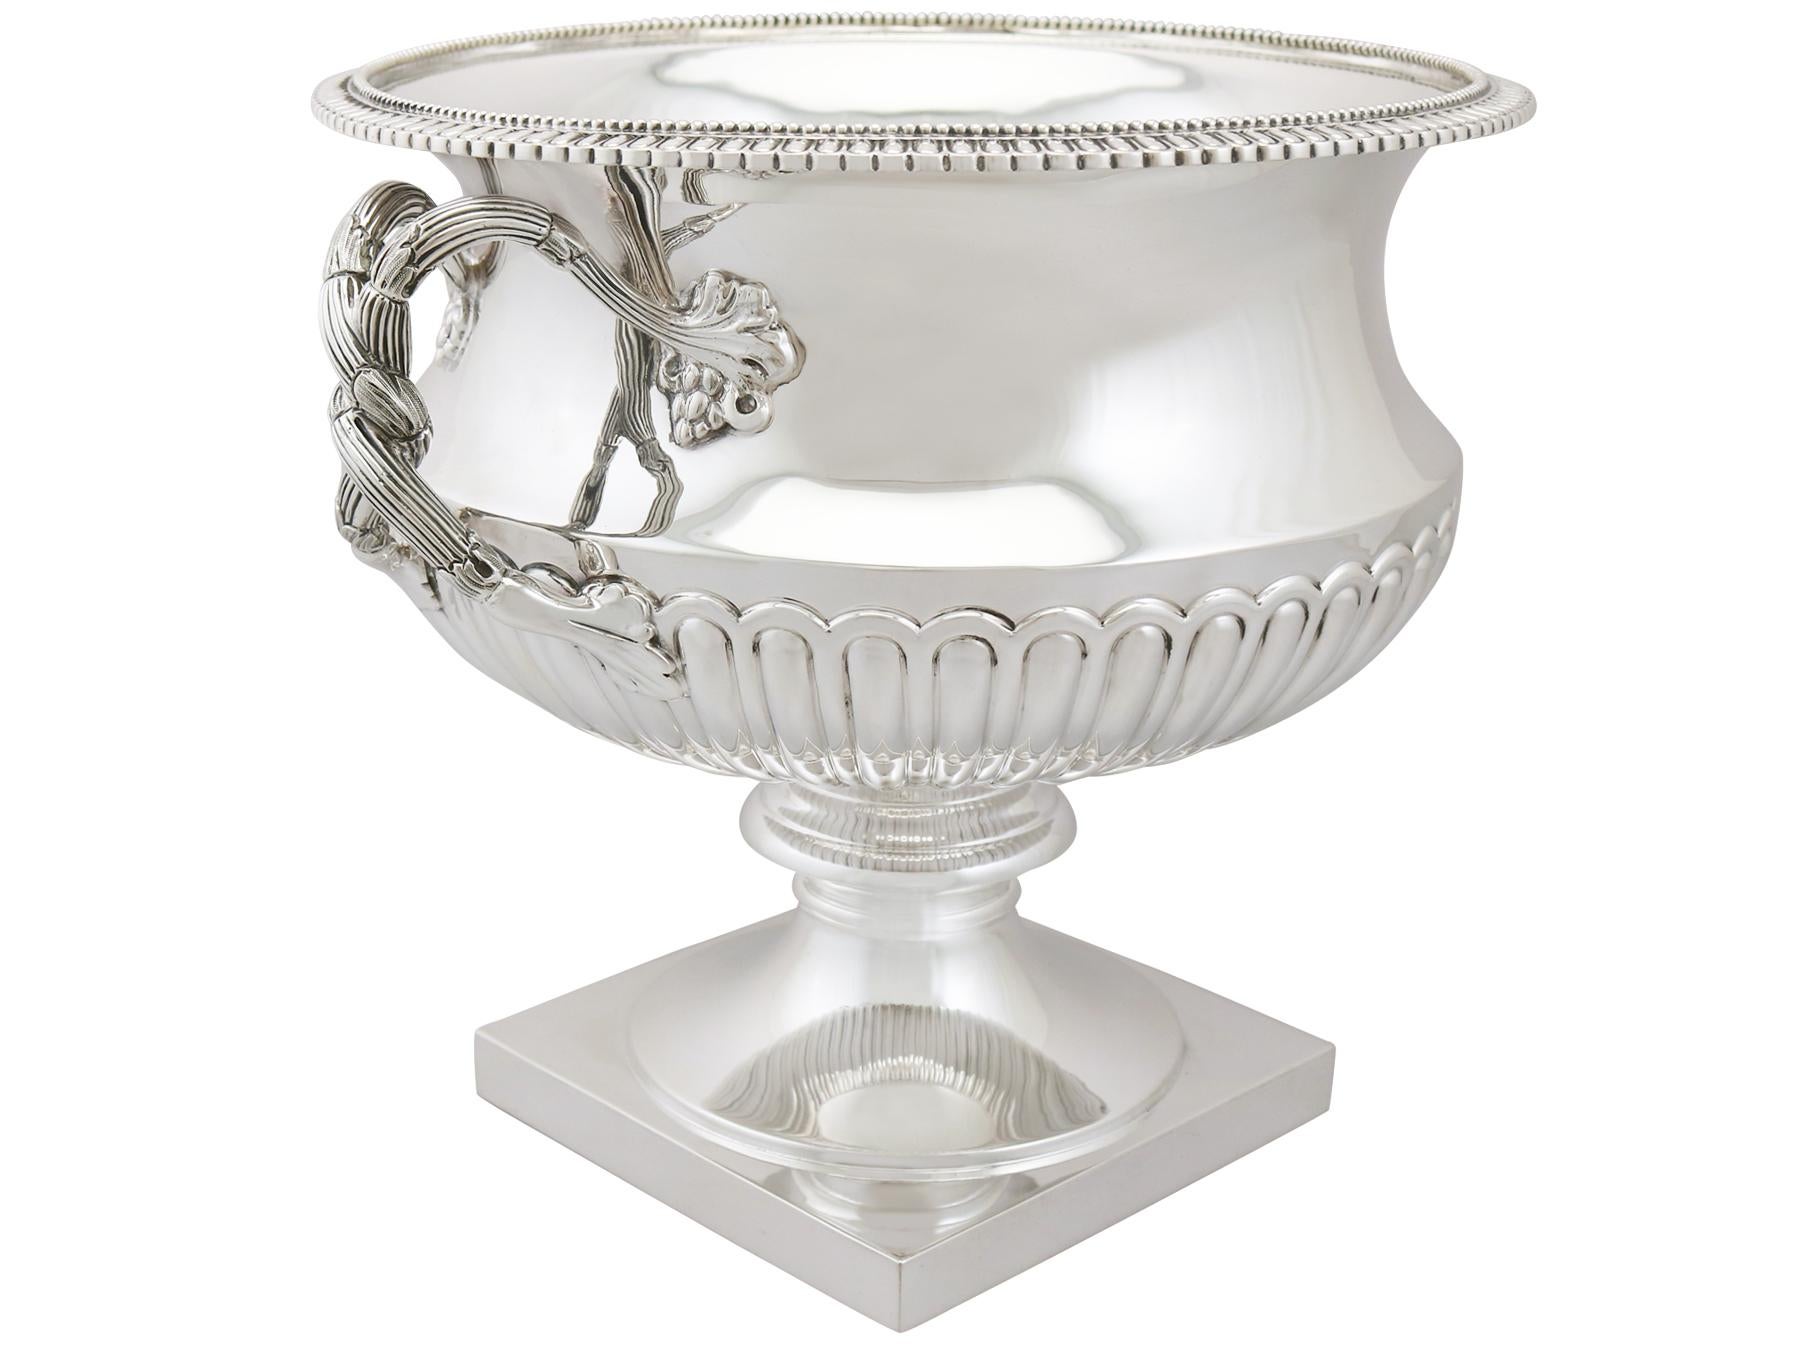 An exceptional, fine and impressive, large antique George V English sterling silver Warwick style vase / bowl; an addition to our silver presentation collection.

This exceptional antique George V sterling silver bowl has a Warwick style form onto